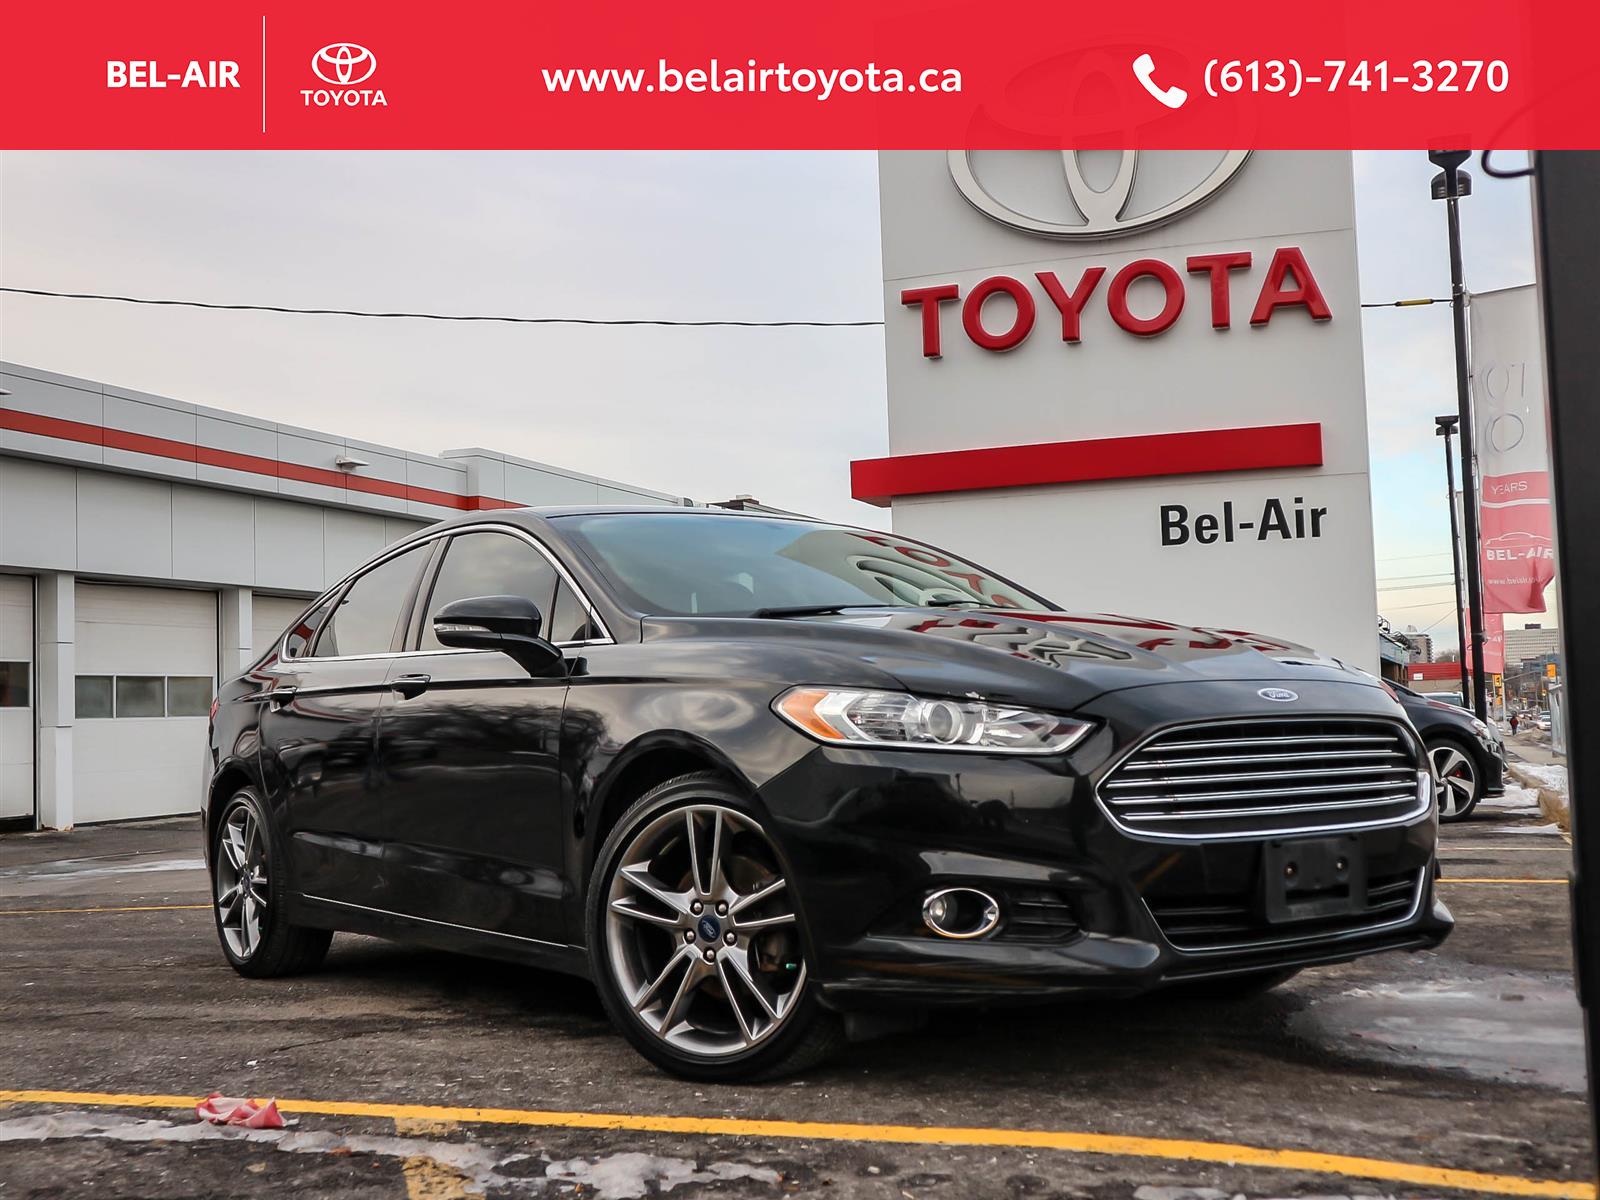 2015 Ford Fusion at Bel-Air Toyota